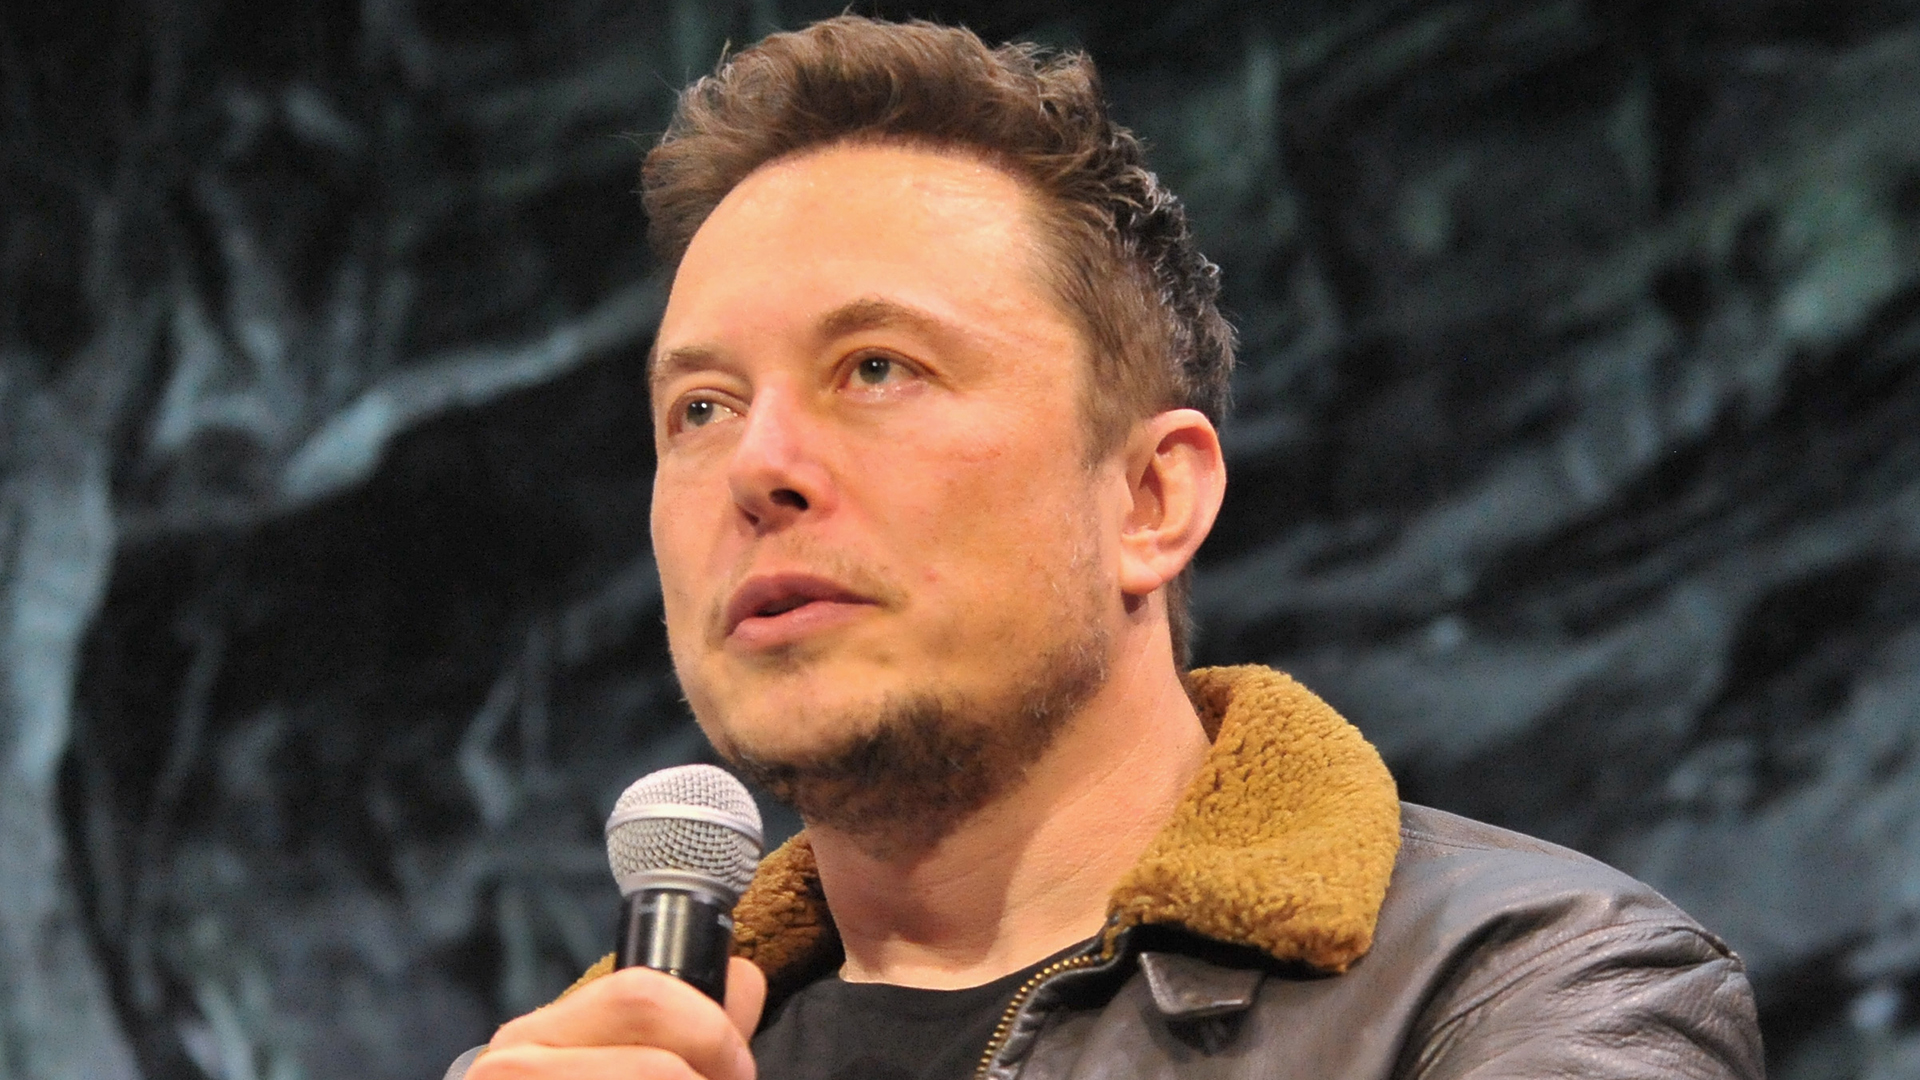 Elon Musk’s ‘All Hands’ Call With Twitter Employees Gets Leaked - He Tells Them That He Wants To Allow Everyone Rights to Post on Platform, Not Less Speech